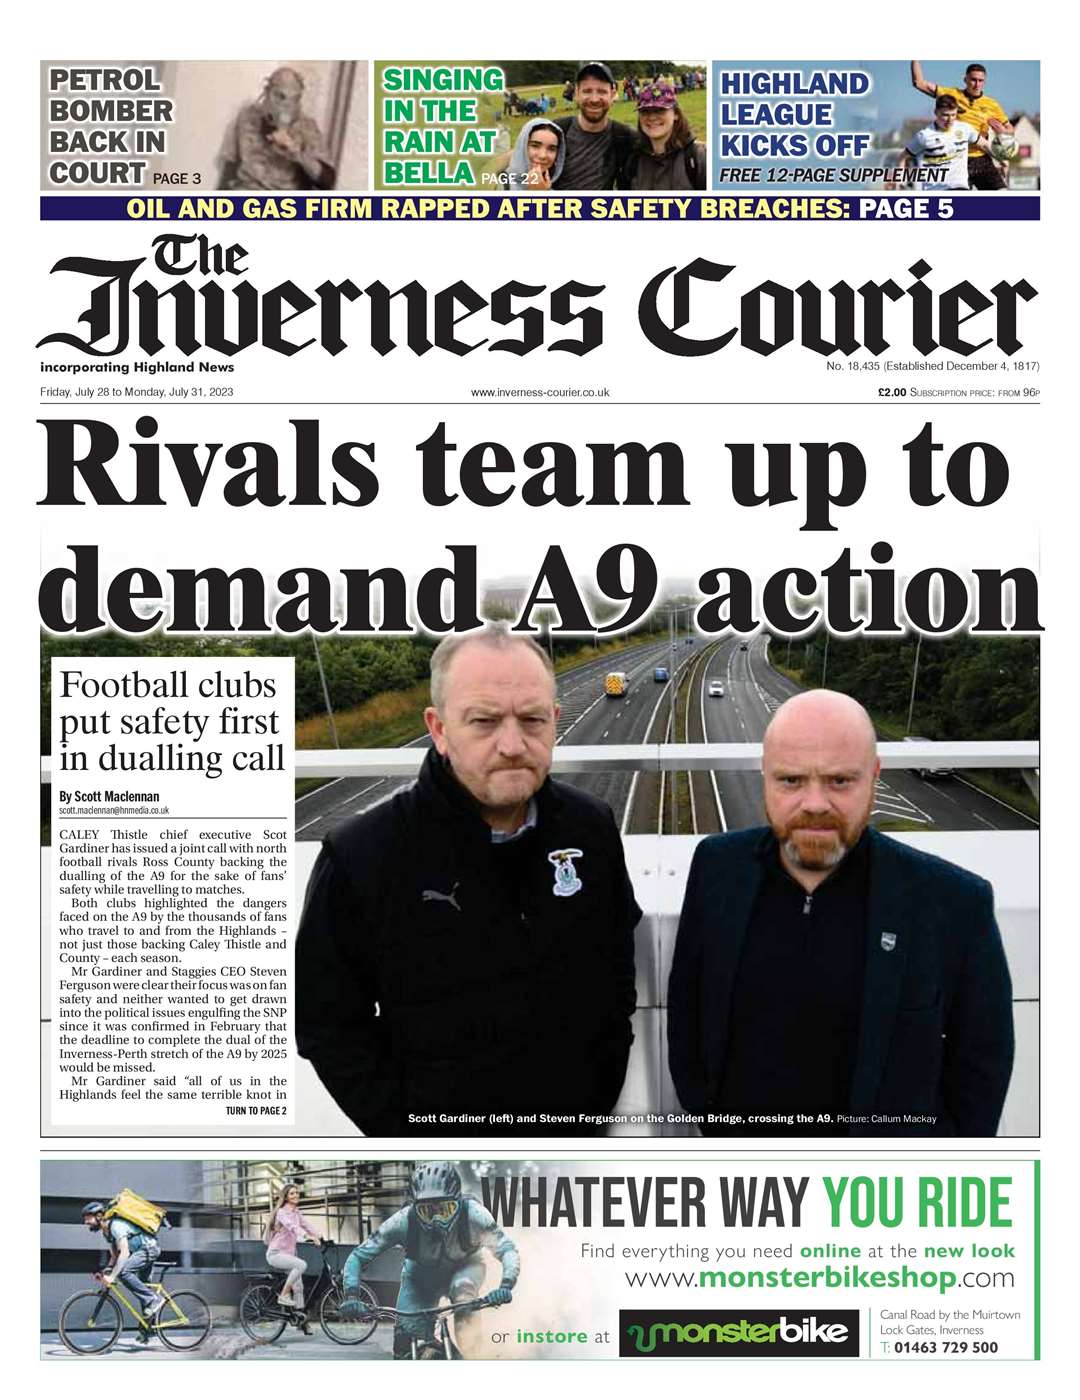 The Inverness Courier, July 28, front page.